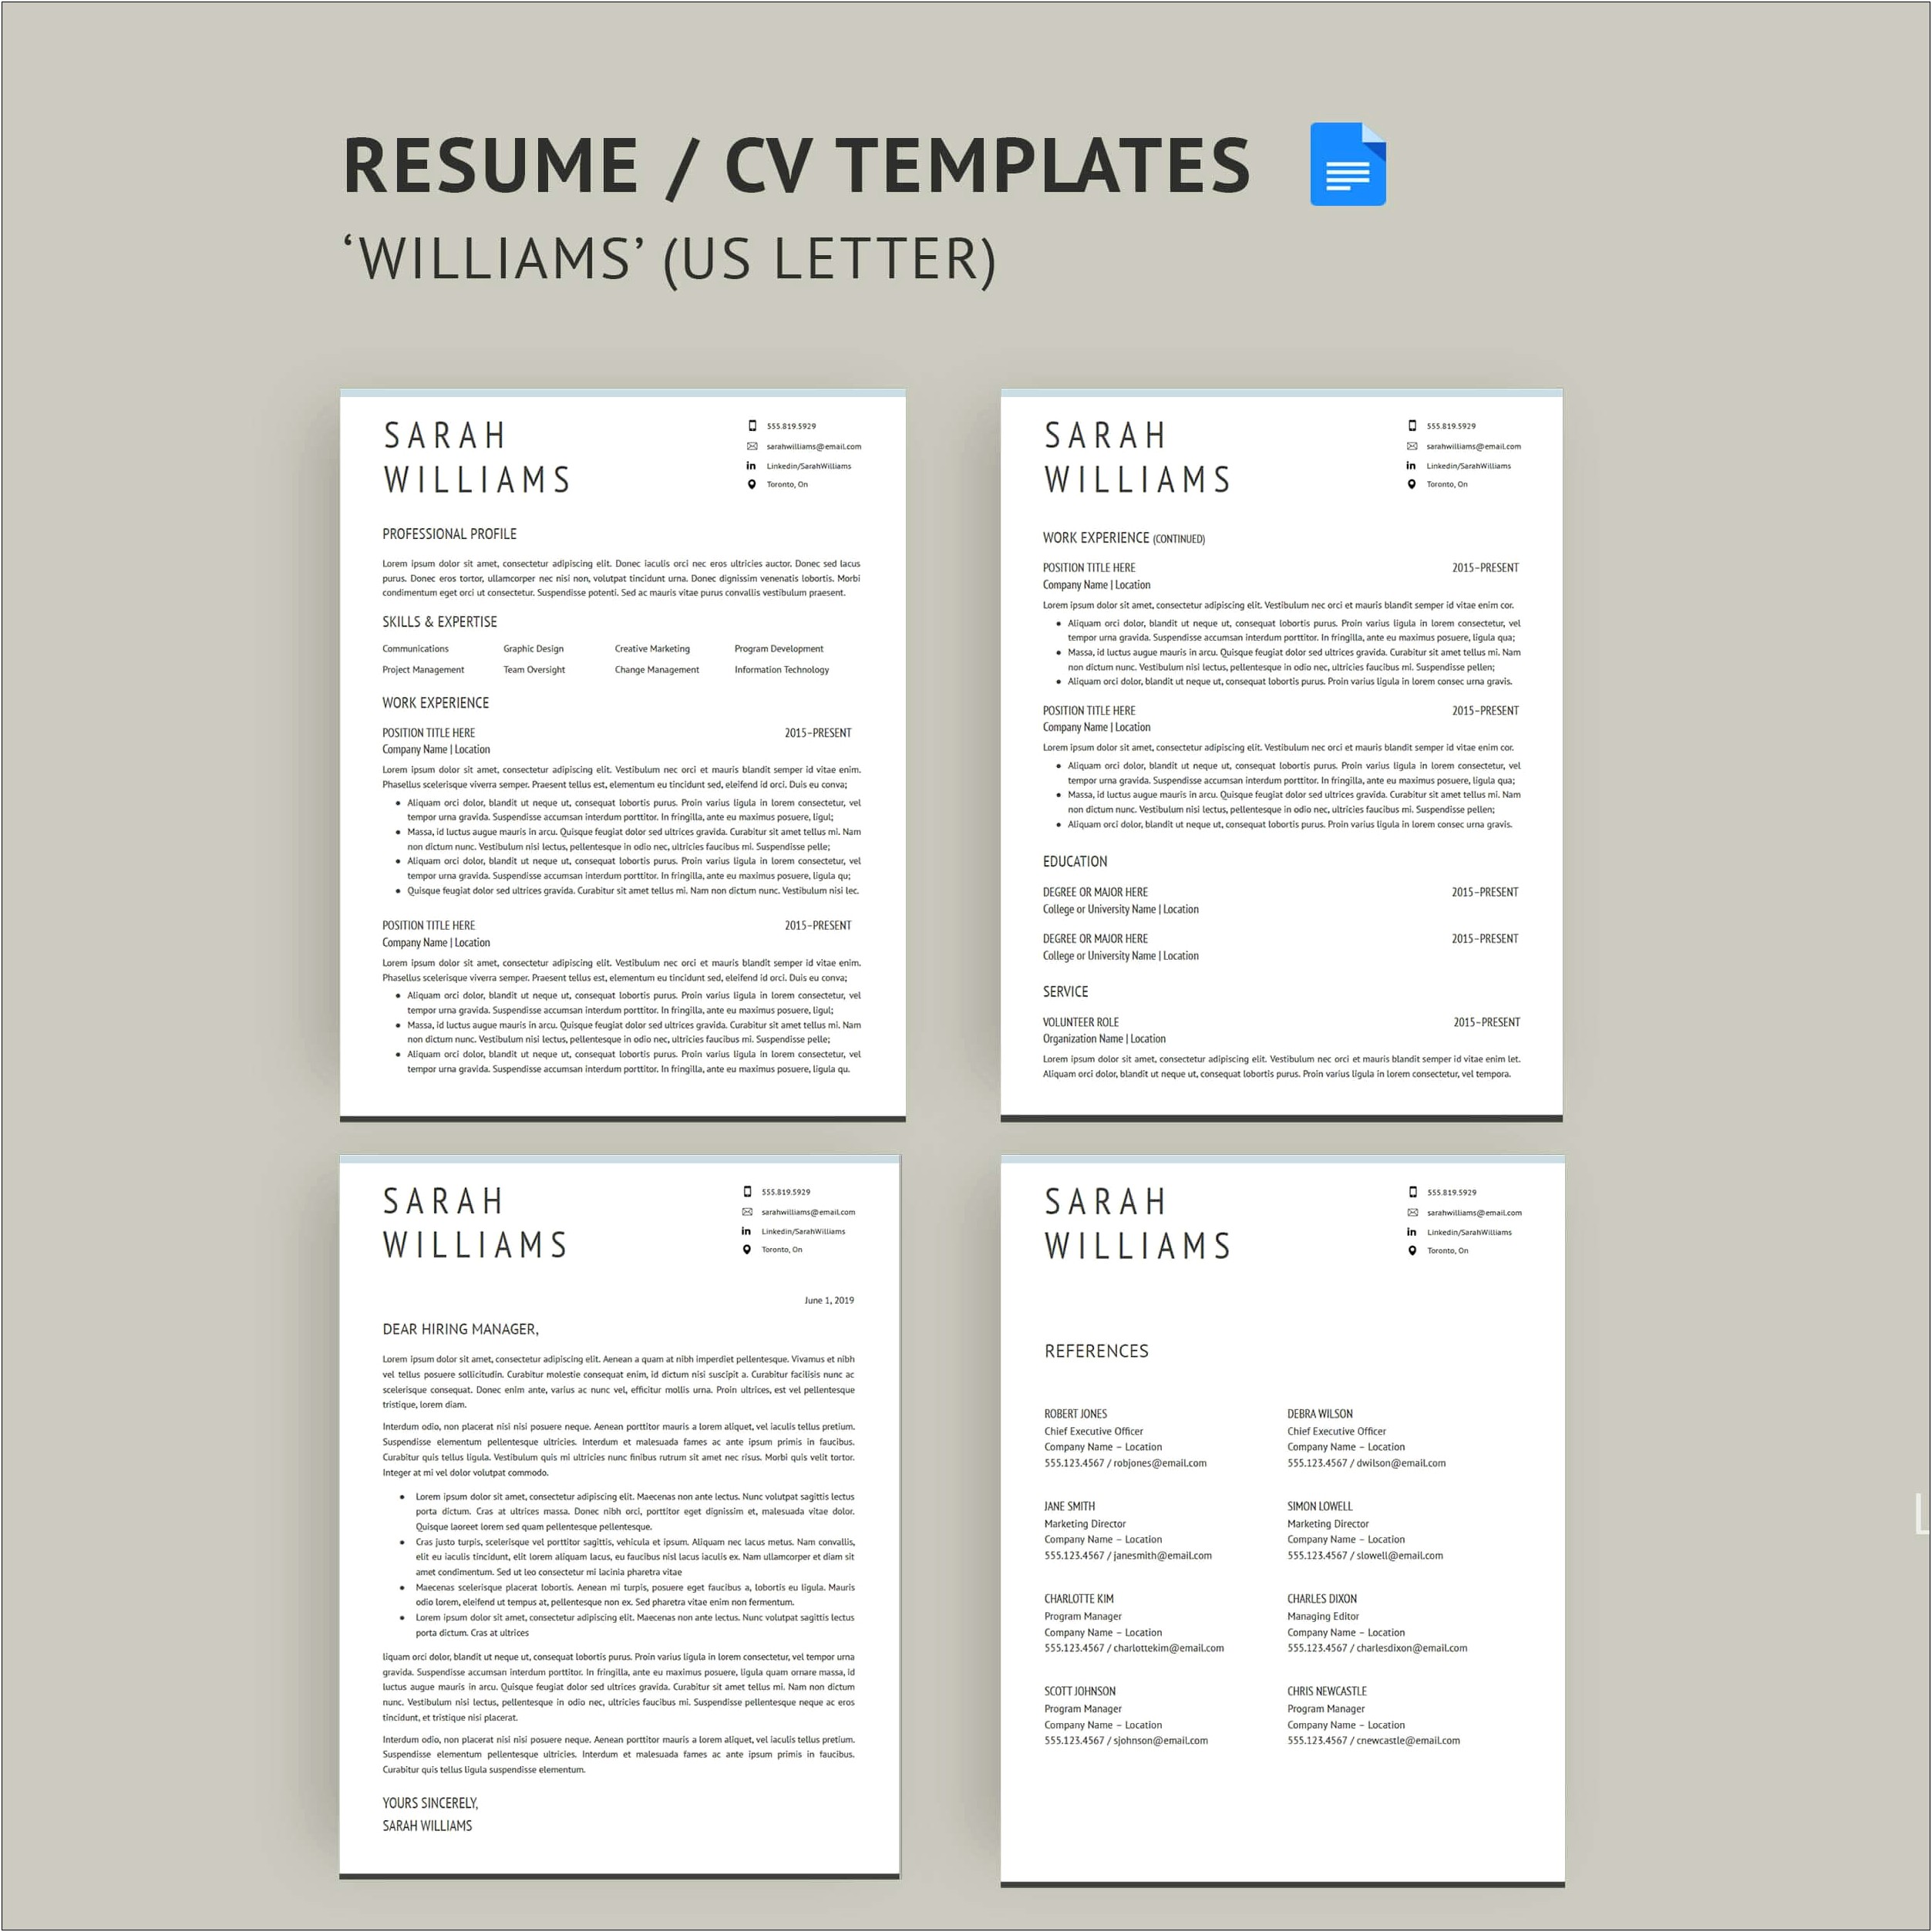 Best Resume Writing And Linkedin Writing Services